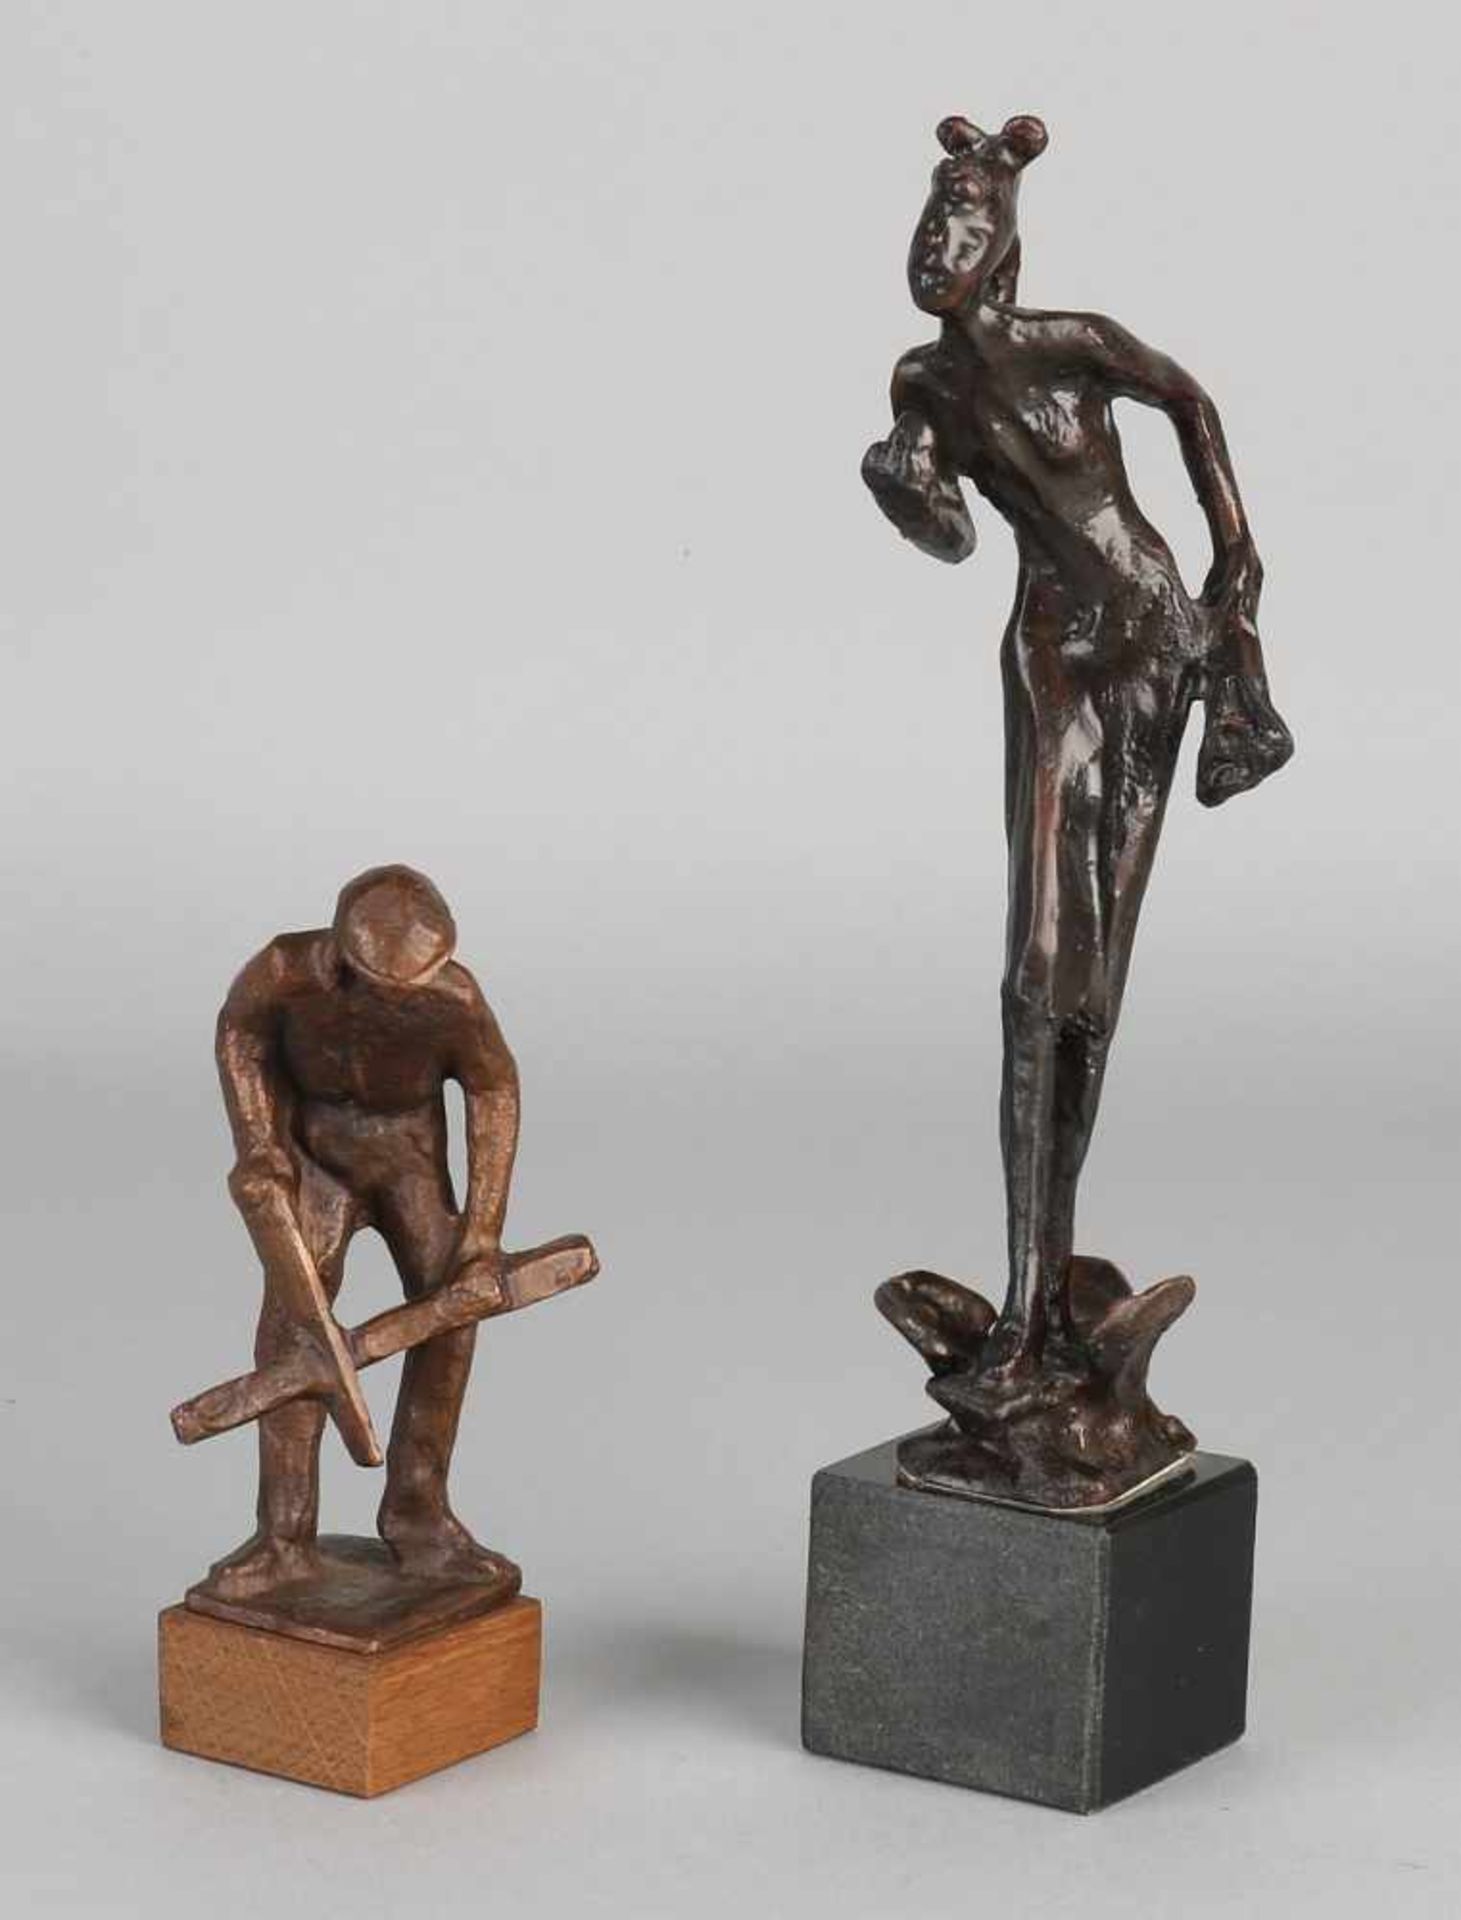 Two bronze figures, of which one monogram. Second half 20th century. Size: H 13-23 cm. In good